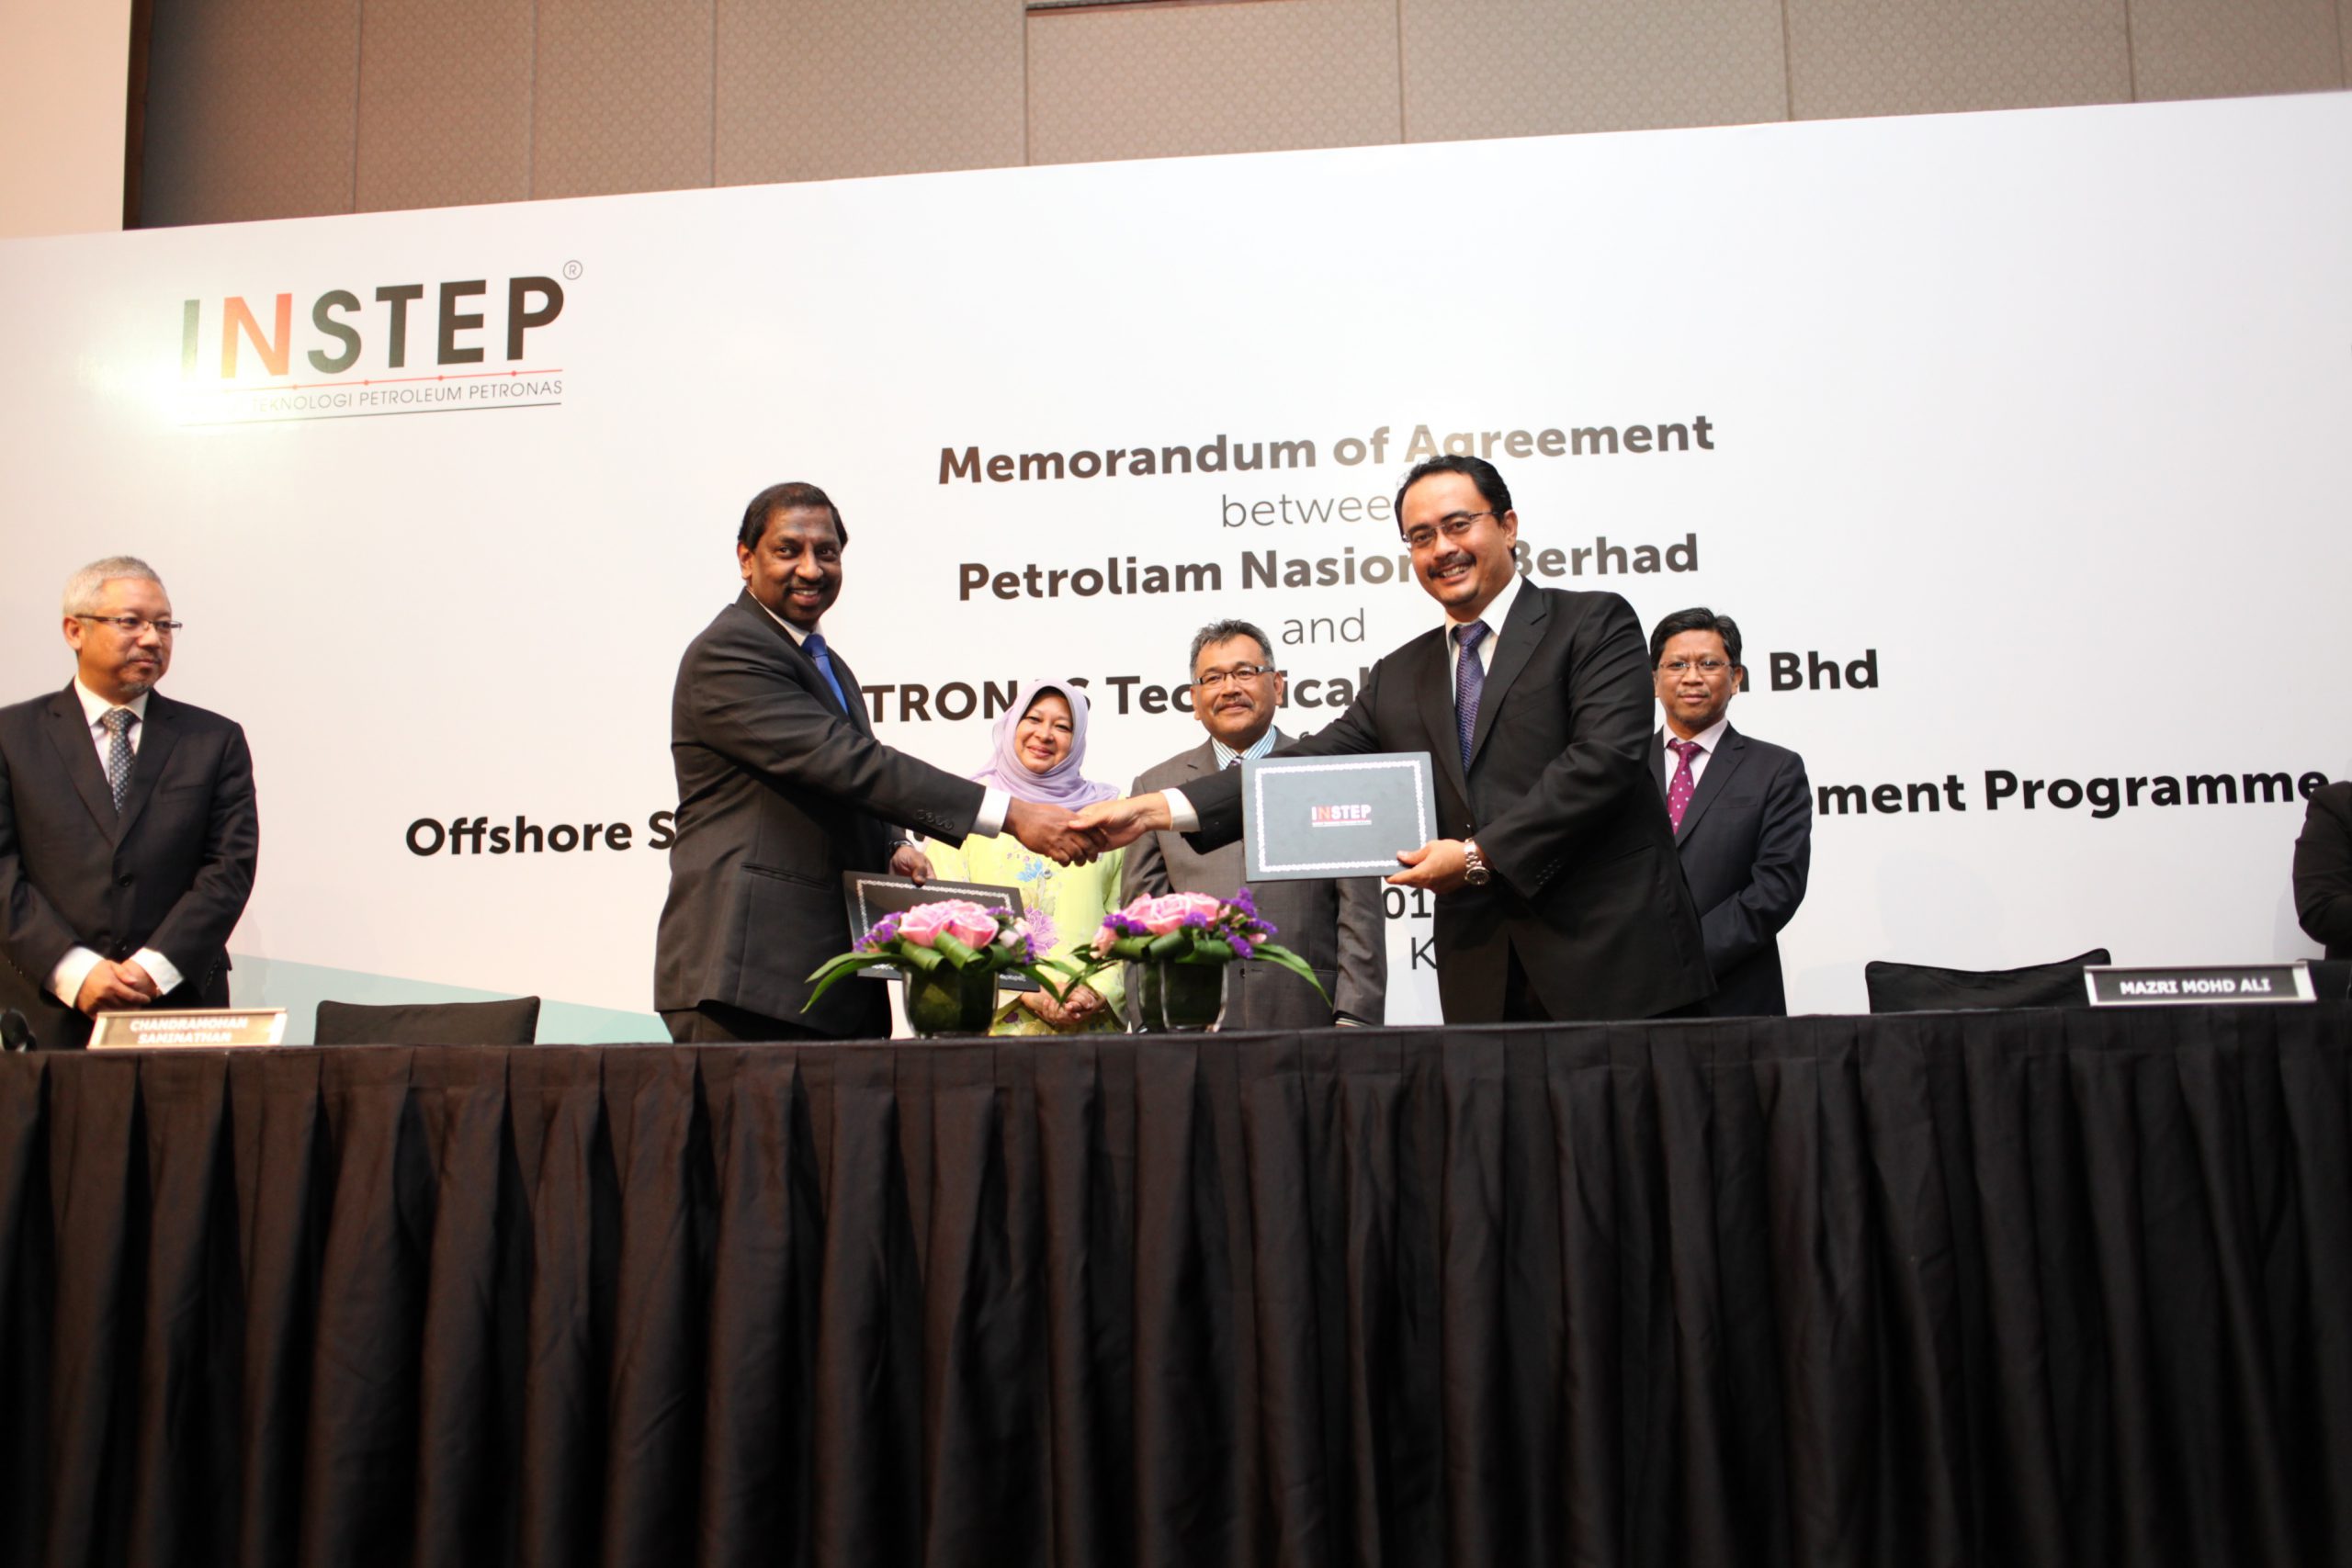 PETRONAS and INSTEP Collaborate to Execute Offshore Self-Regulation Inspectors Development Programme